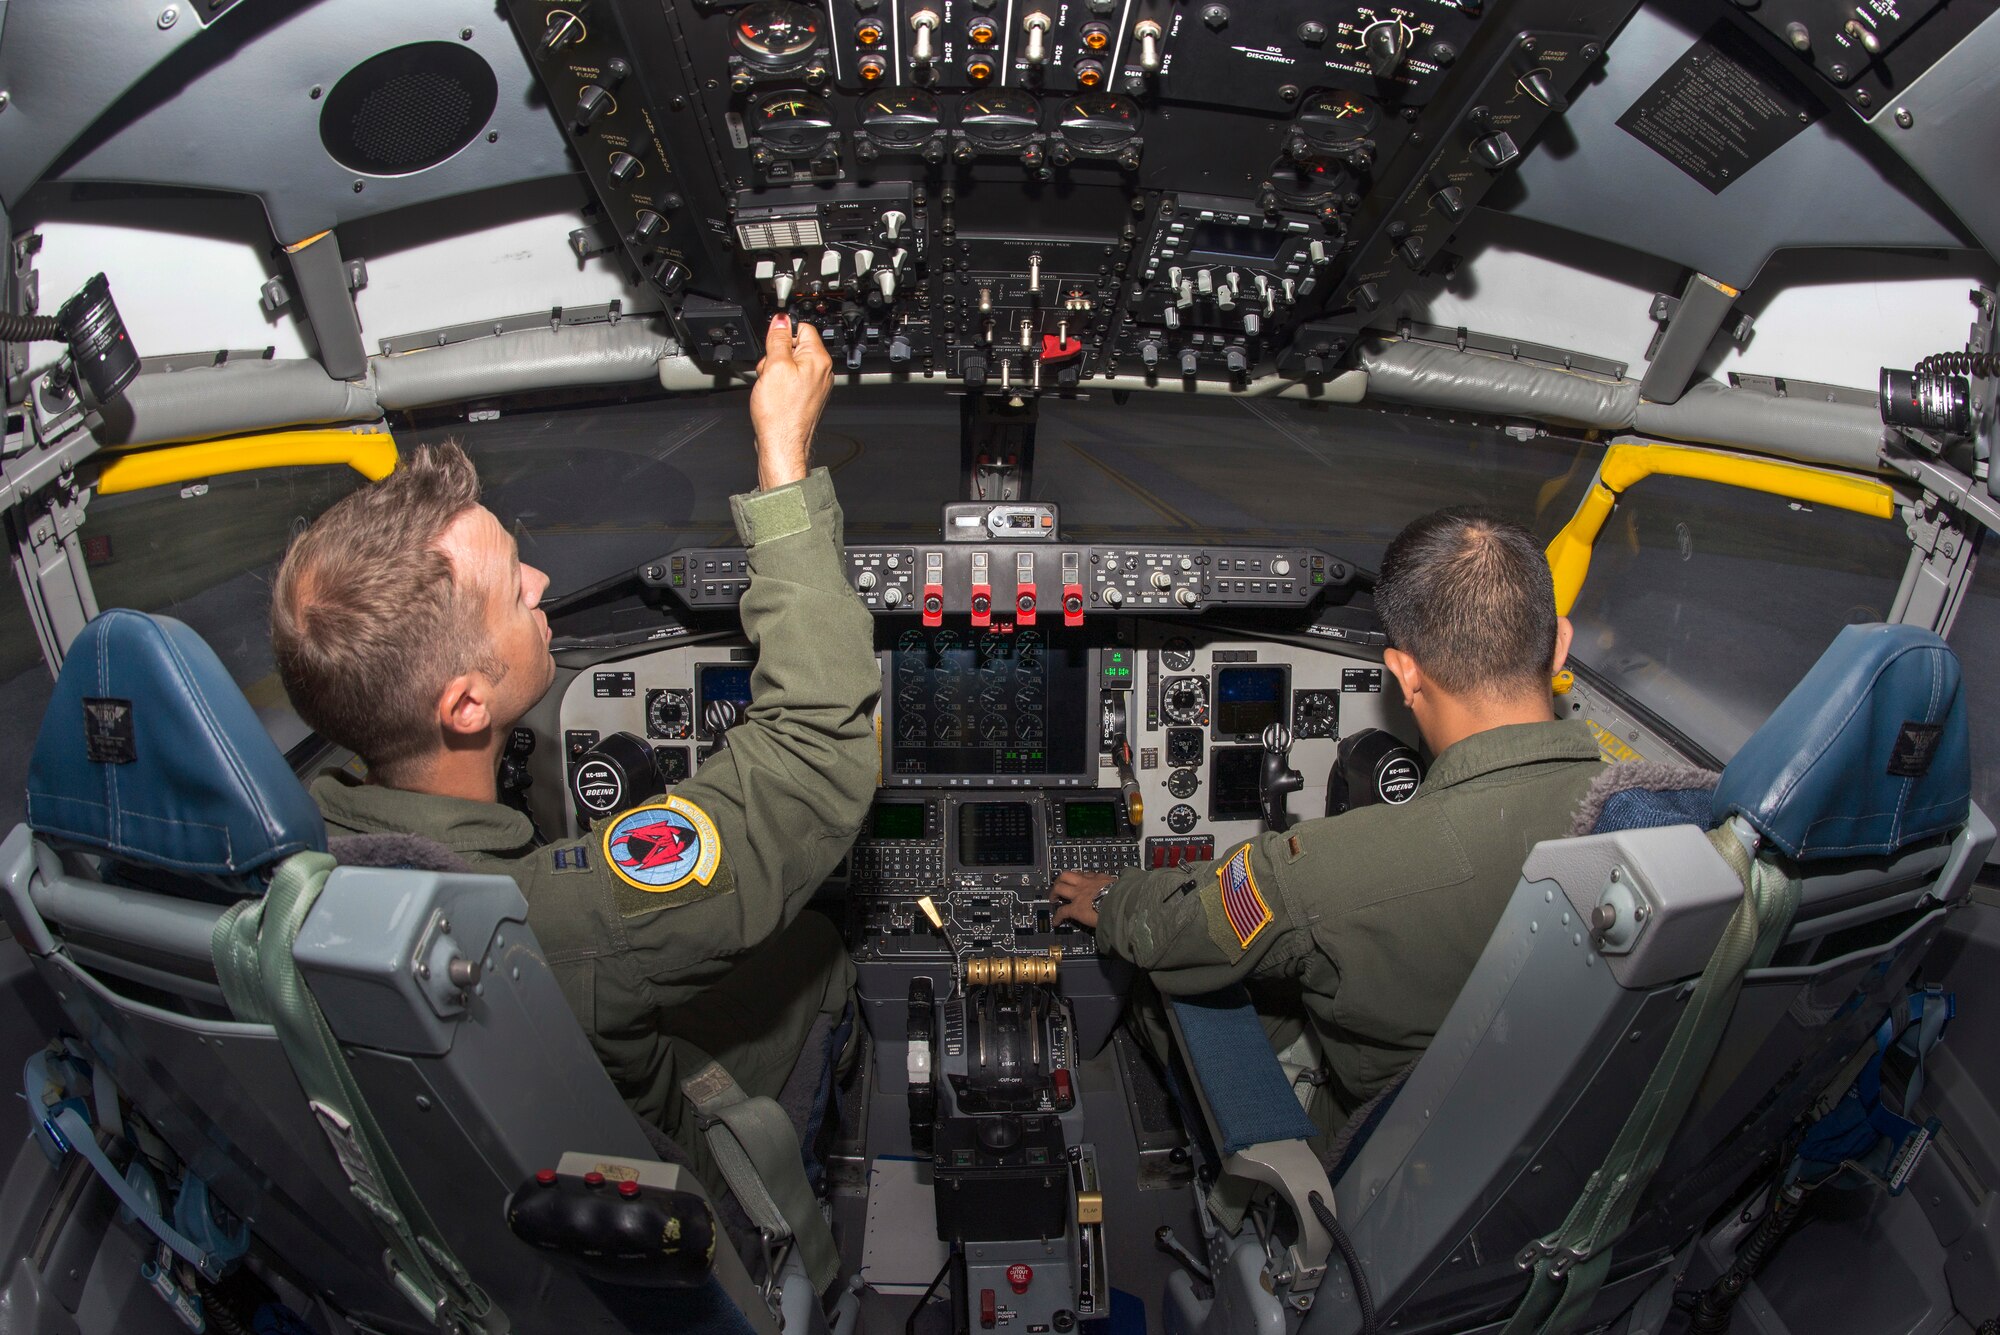 U.S. Air Force Capt. Josh Welch, left, and 2nd Lt. Kent Melendez, right, both pilots assigned to the 50th Air Refueling Squadron, perform pre-flight procedures in the KC-135 flight simulator at MacDill Air Force Base, Fla, Aug. 17, 2018.